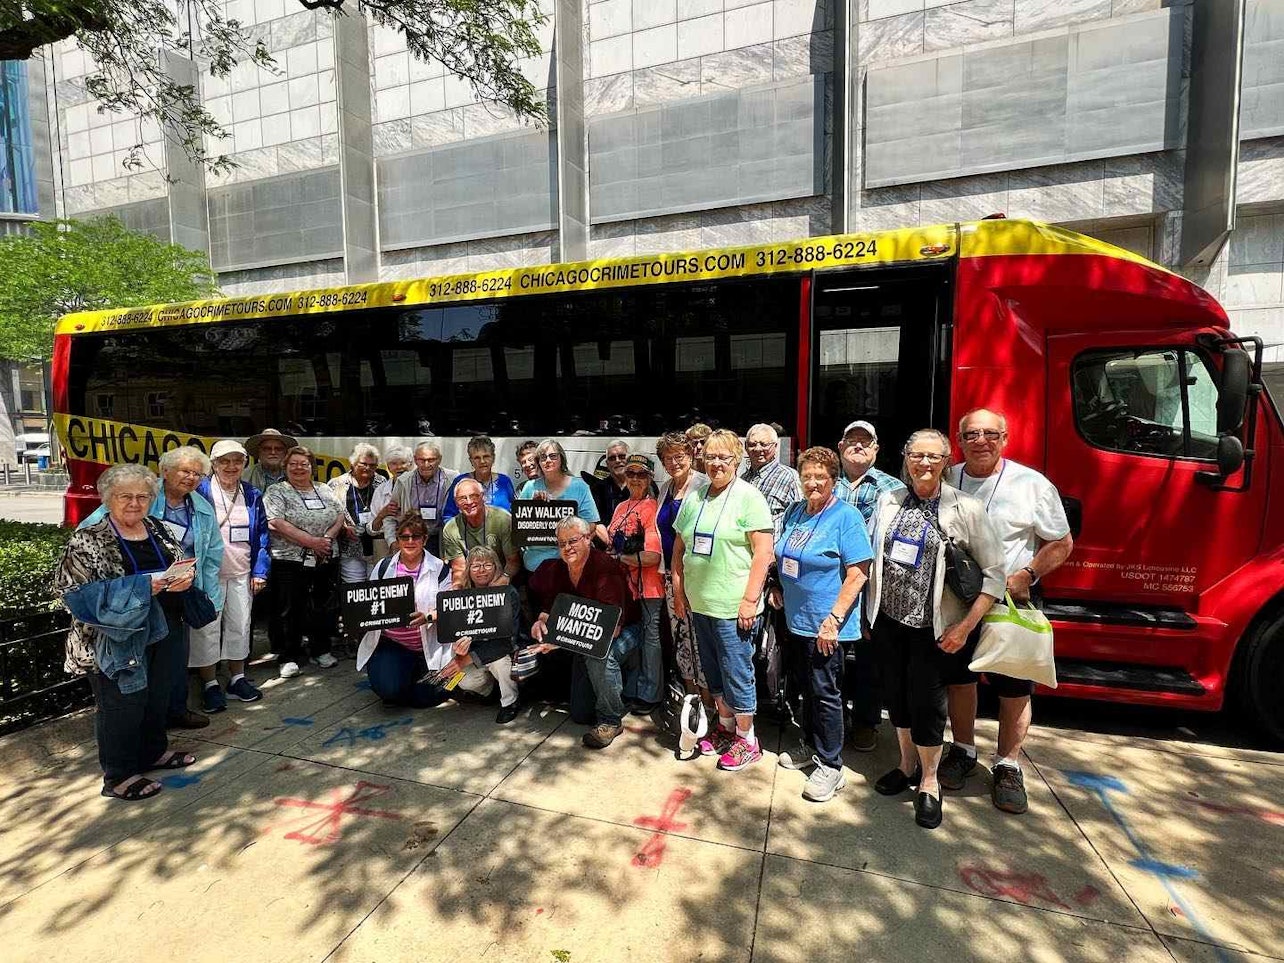 Chicago Night Crimes Bus Tour: Criminals, Mobsters and Gangsters - Accommodations in Chicago